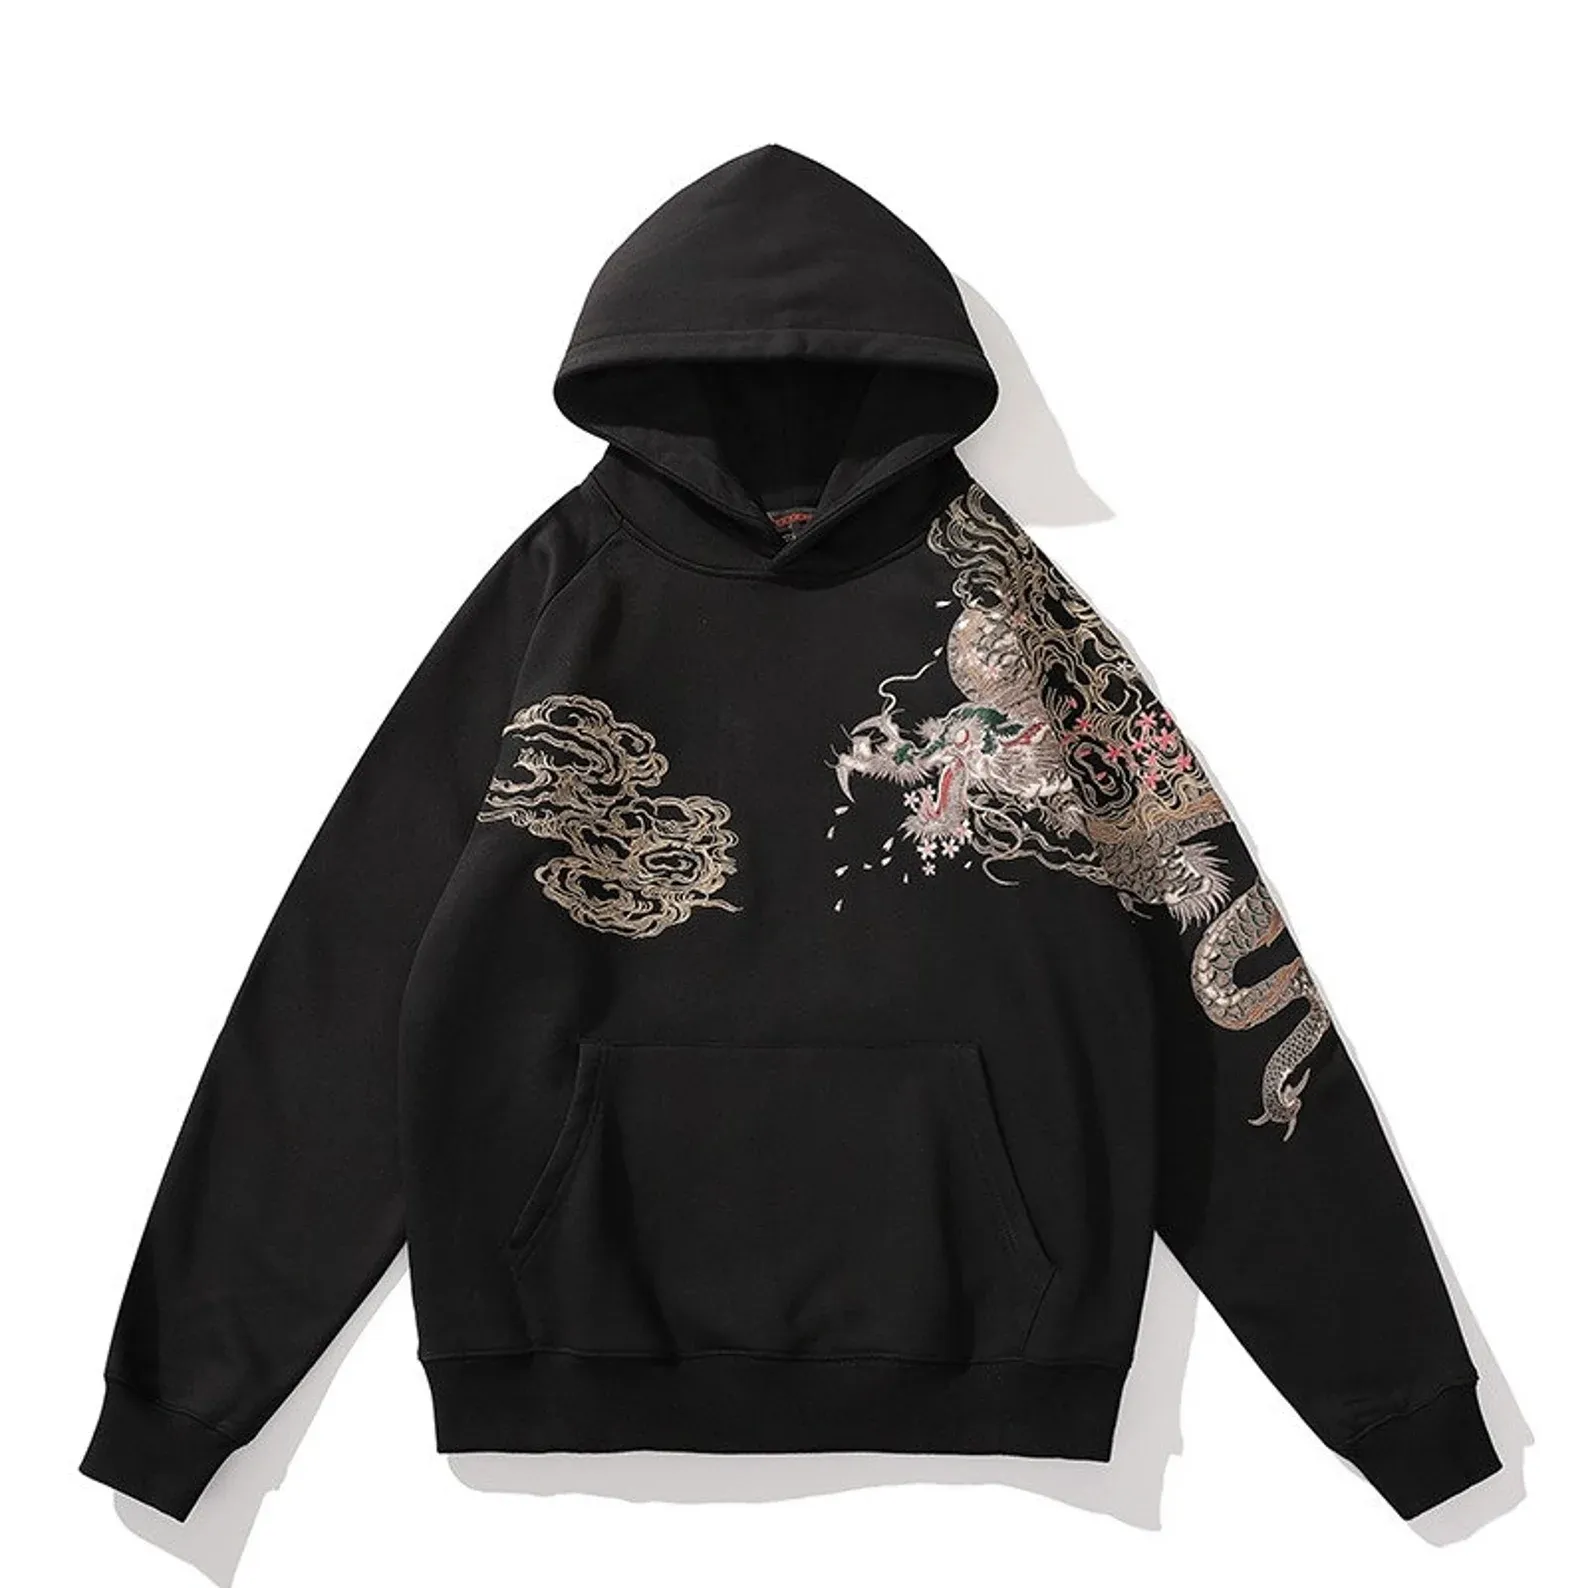 Cool Chinese Style Men's Embroidered Hoodie Luxurious Dragon Exquisite Workmanship Sweatshirt Pullover Black Hoodie